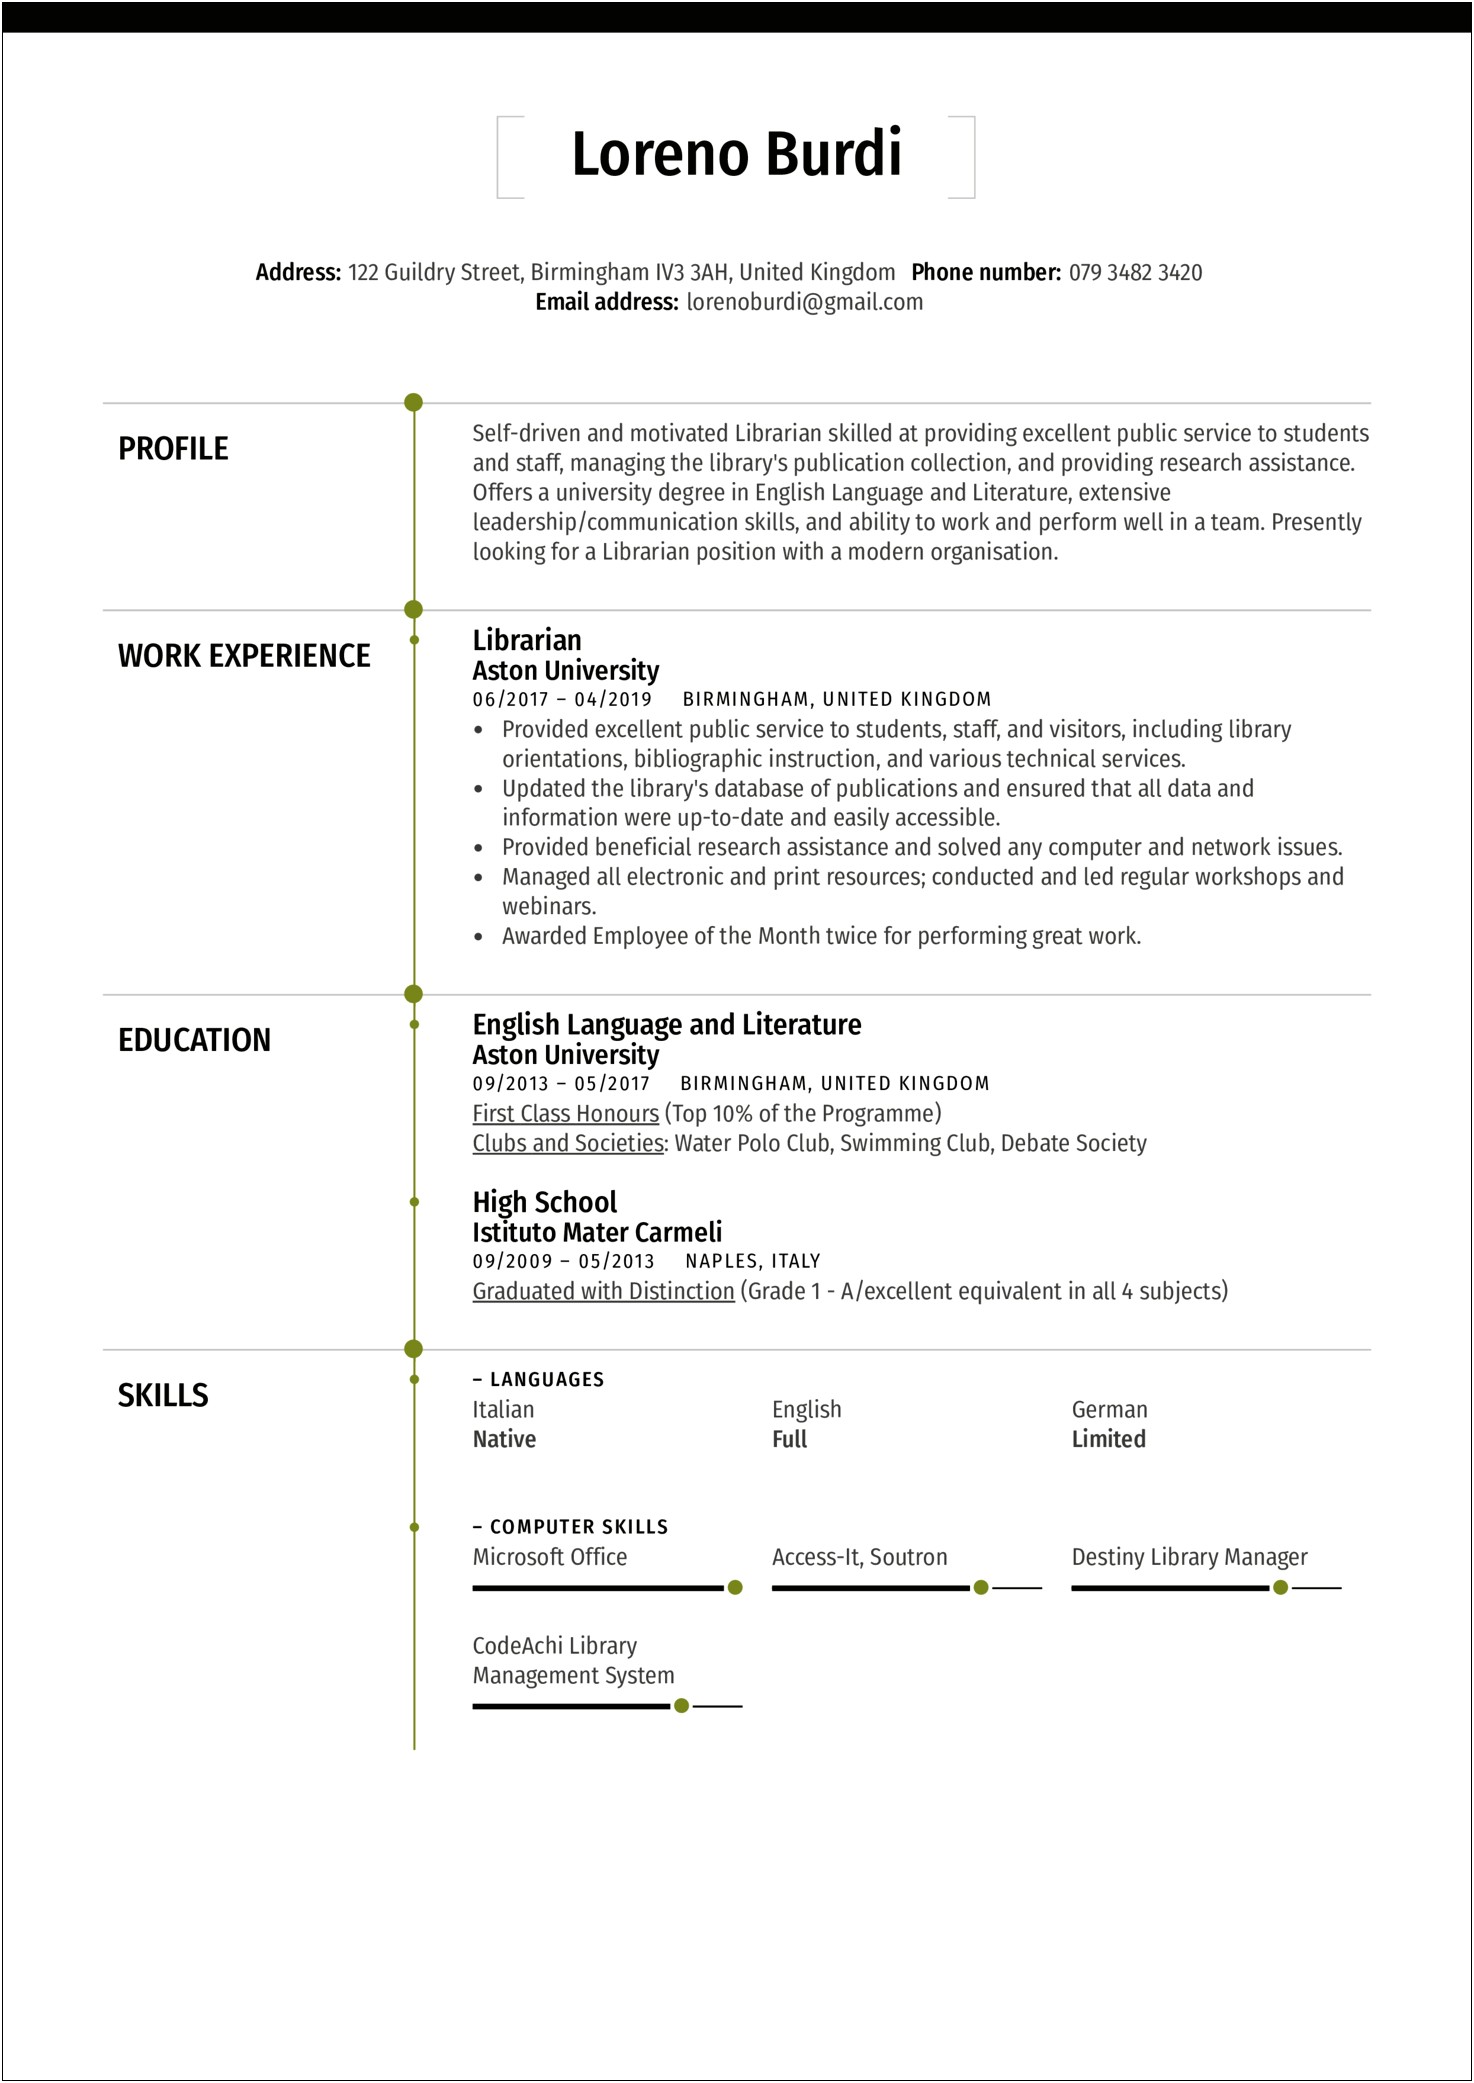 Sample Professional Profiles For Public Librarian Resume